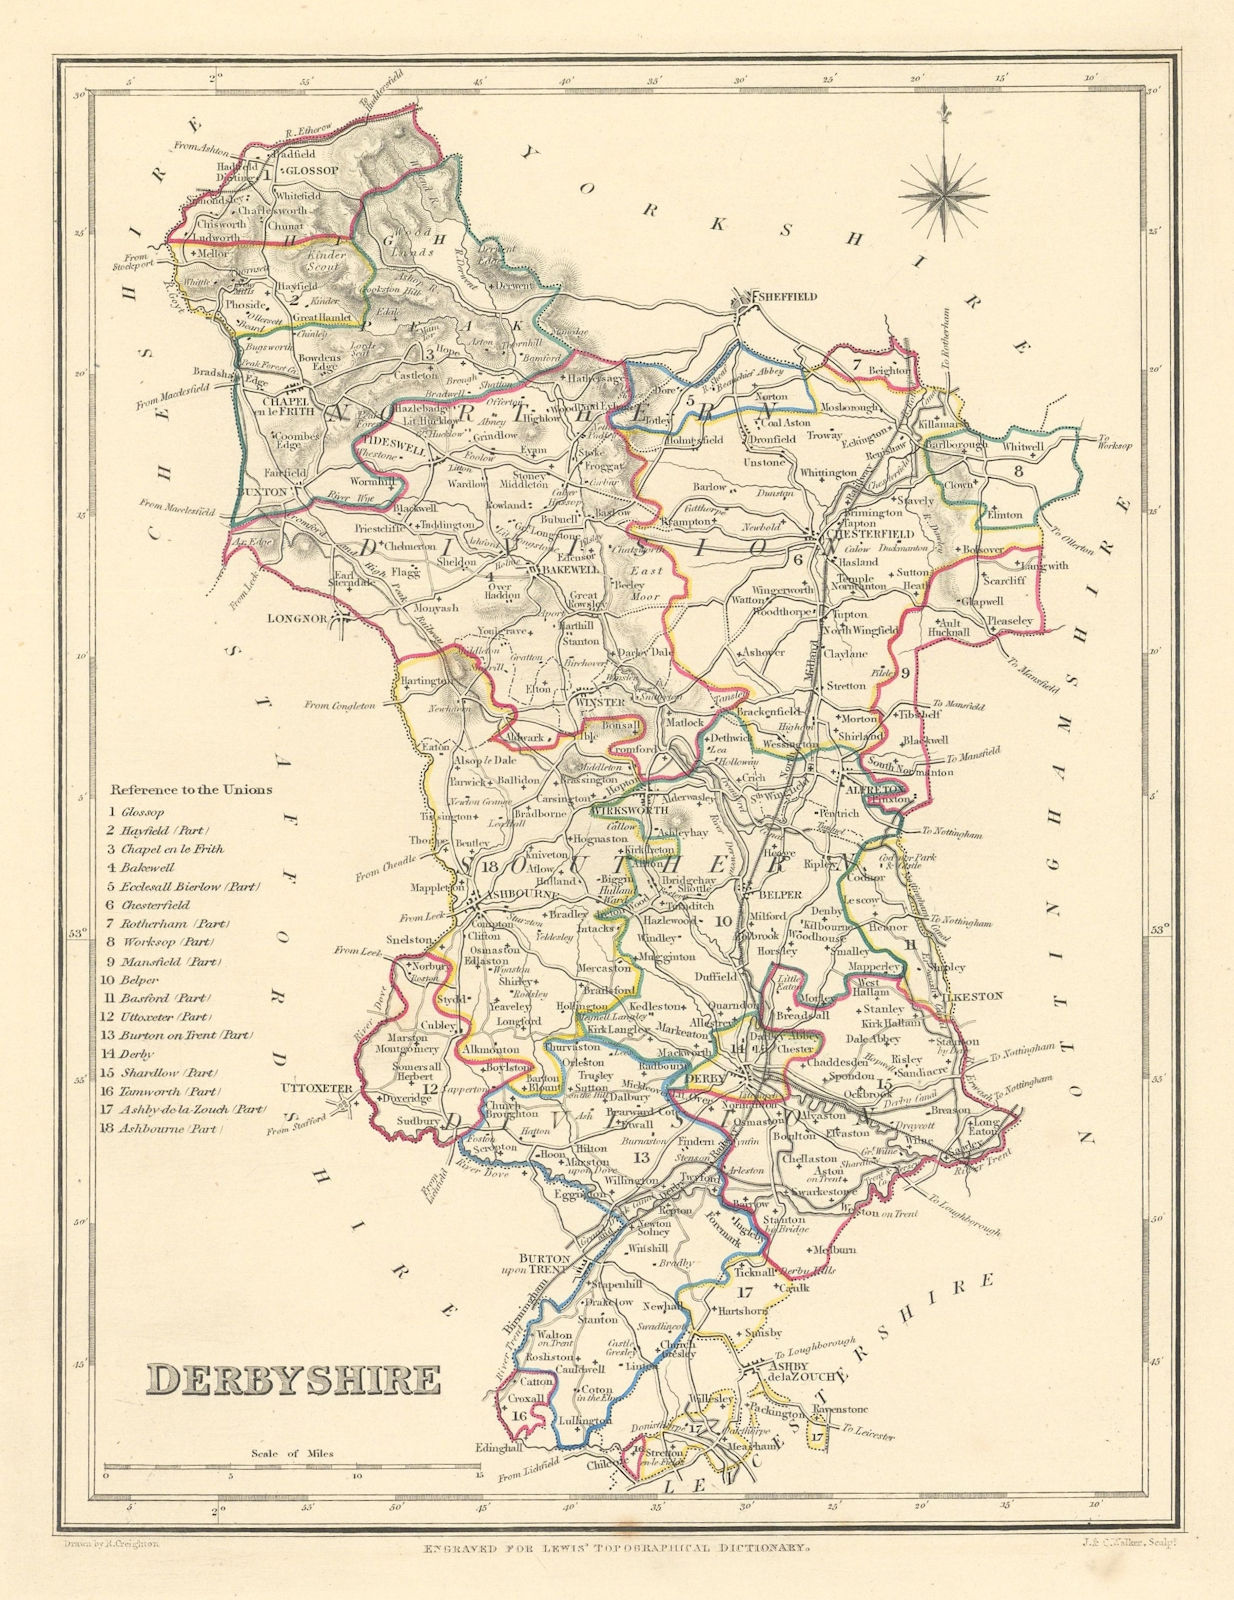 Associate Product Antique county map of DERBYSHIRE by Creighton & Walker for Lewis c1840 old